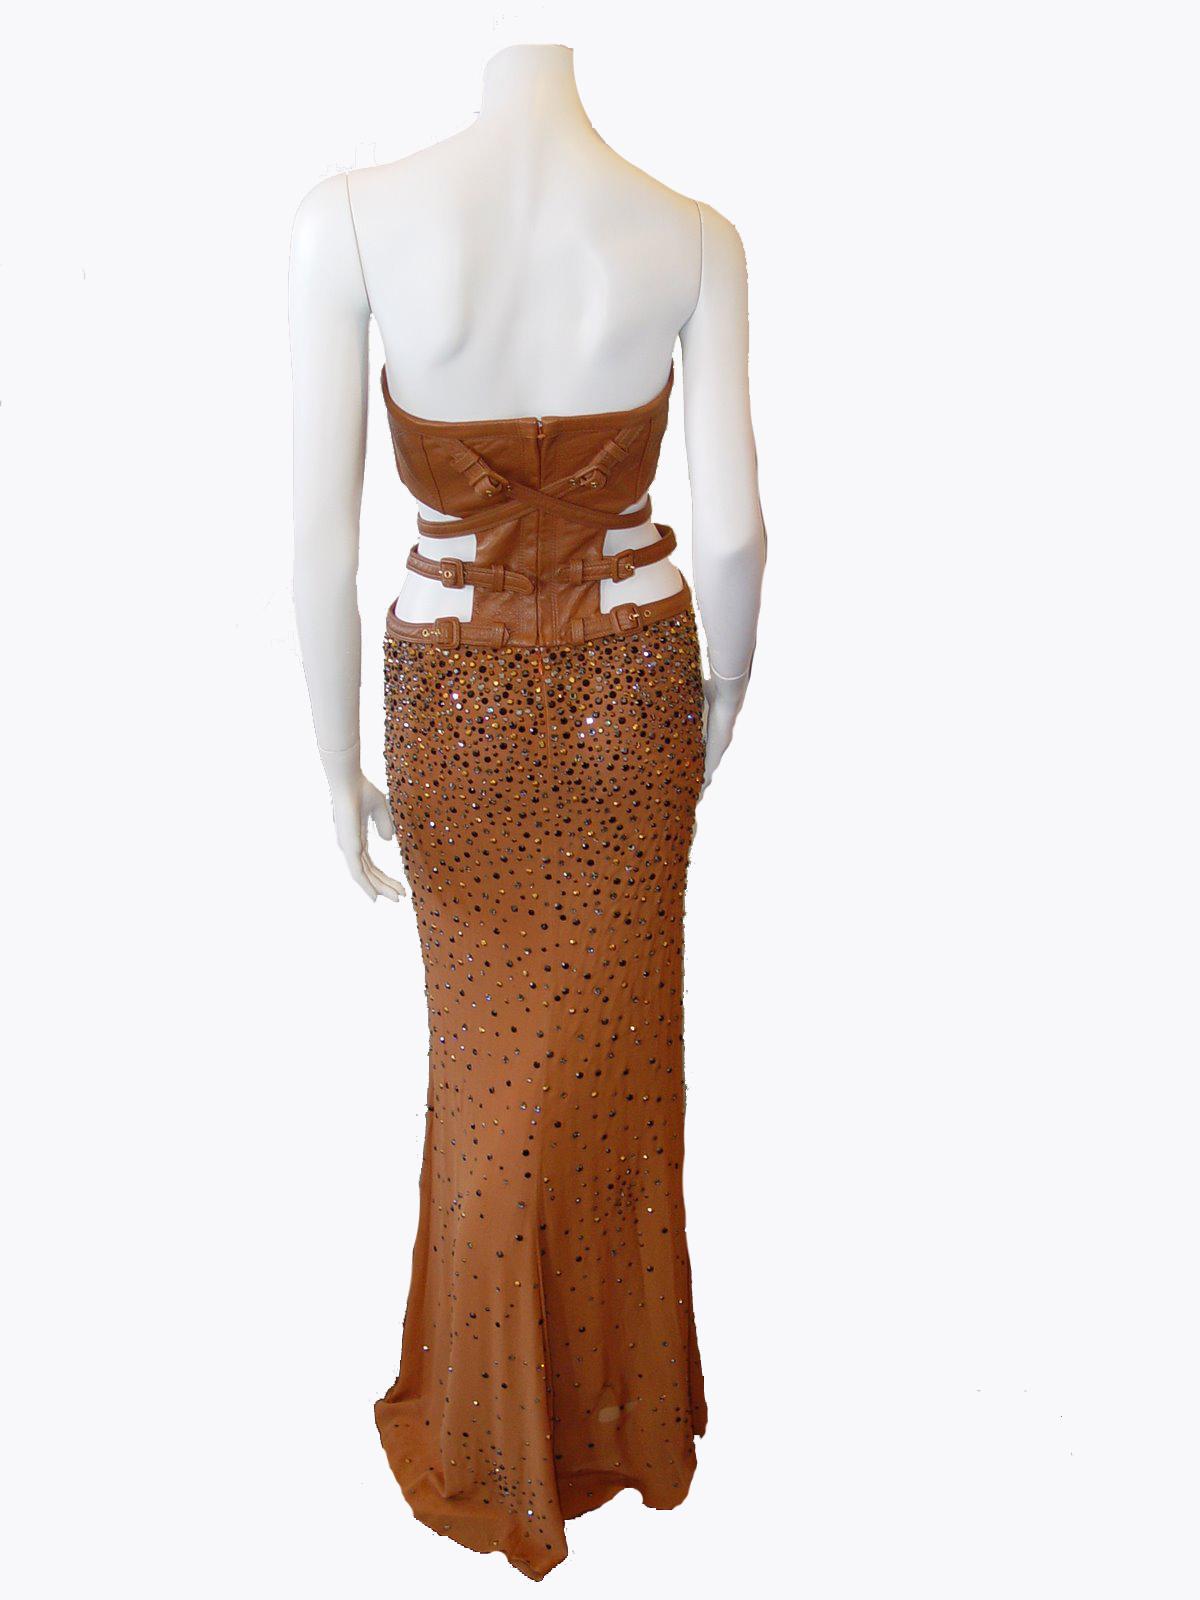 A/W 2001 Vintage Gianni Versace Crystal Embellished Silk and Leather Bondage Dress

Size 38

Excellent condition